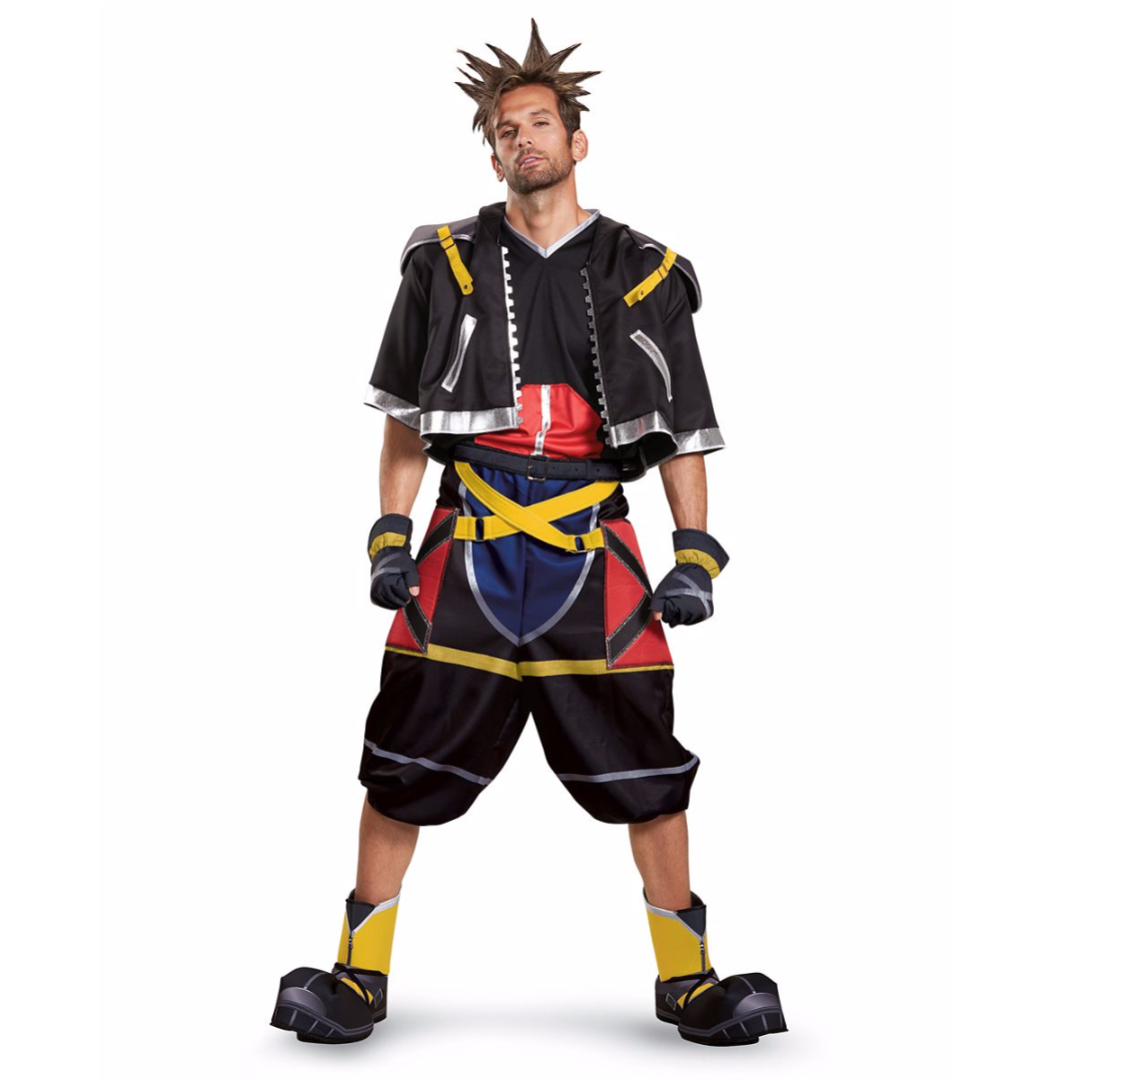 This Officially-Licensed Kingdom Hearts Halloween Costume.